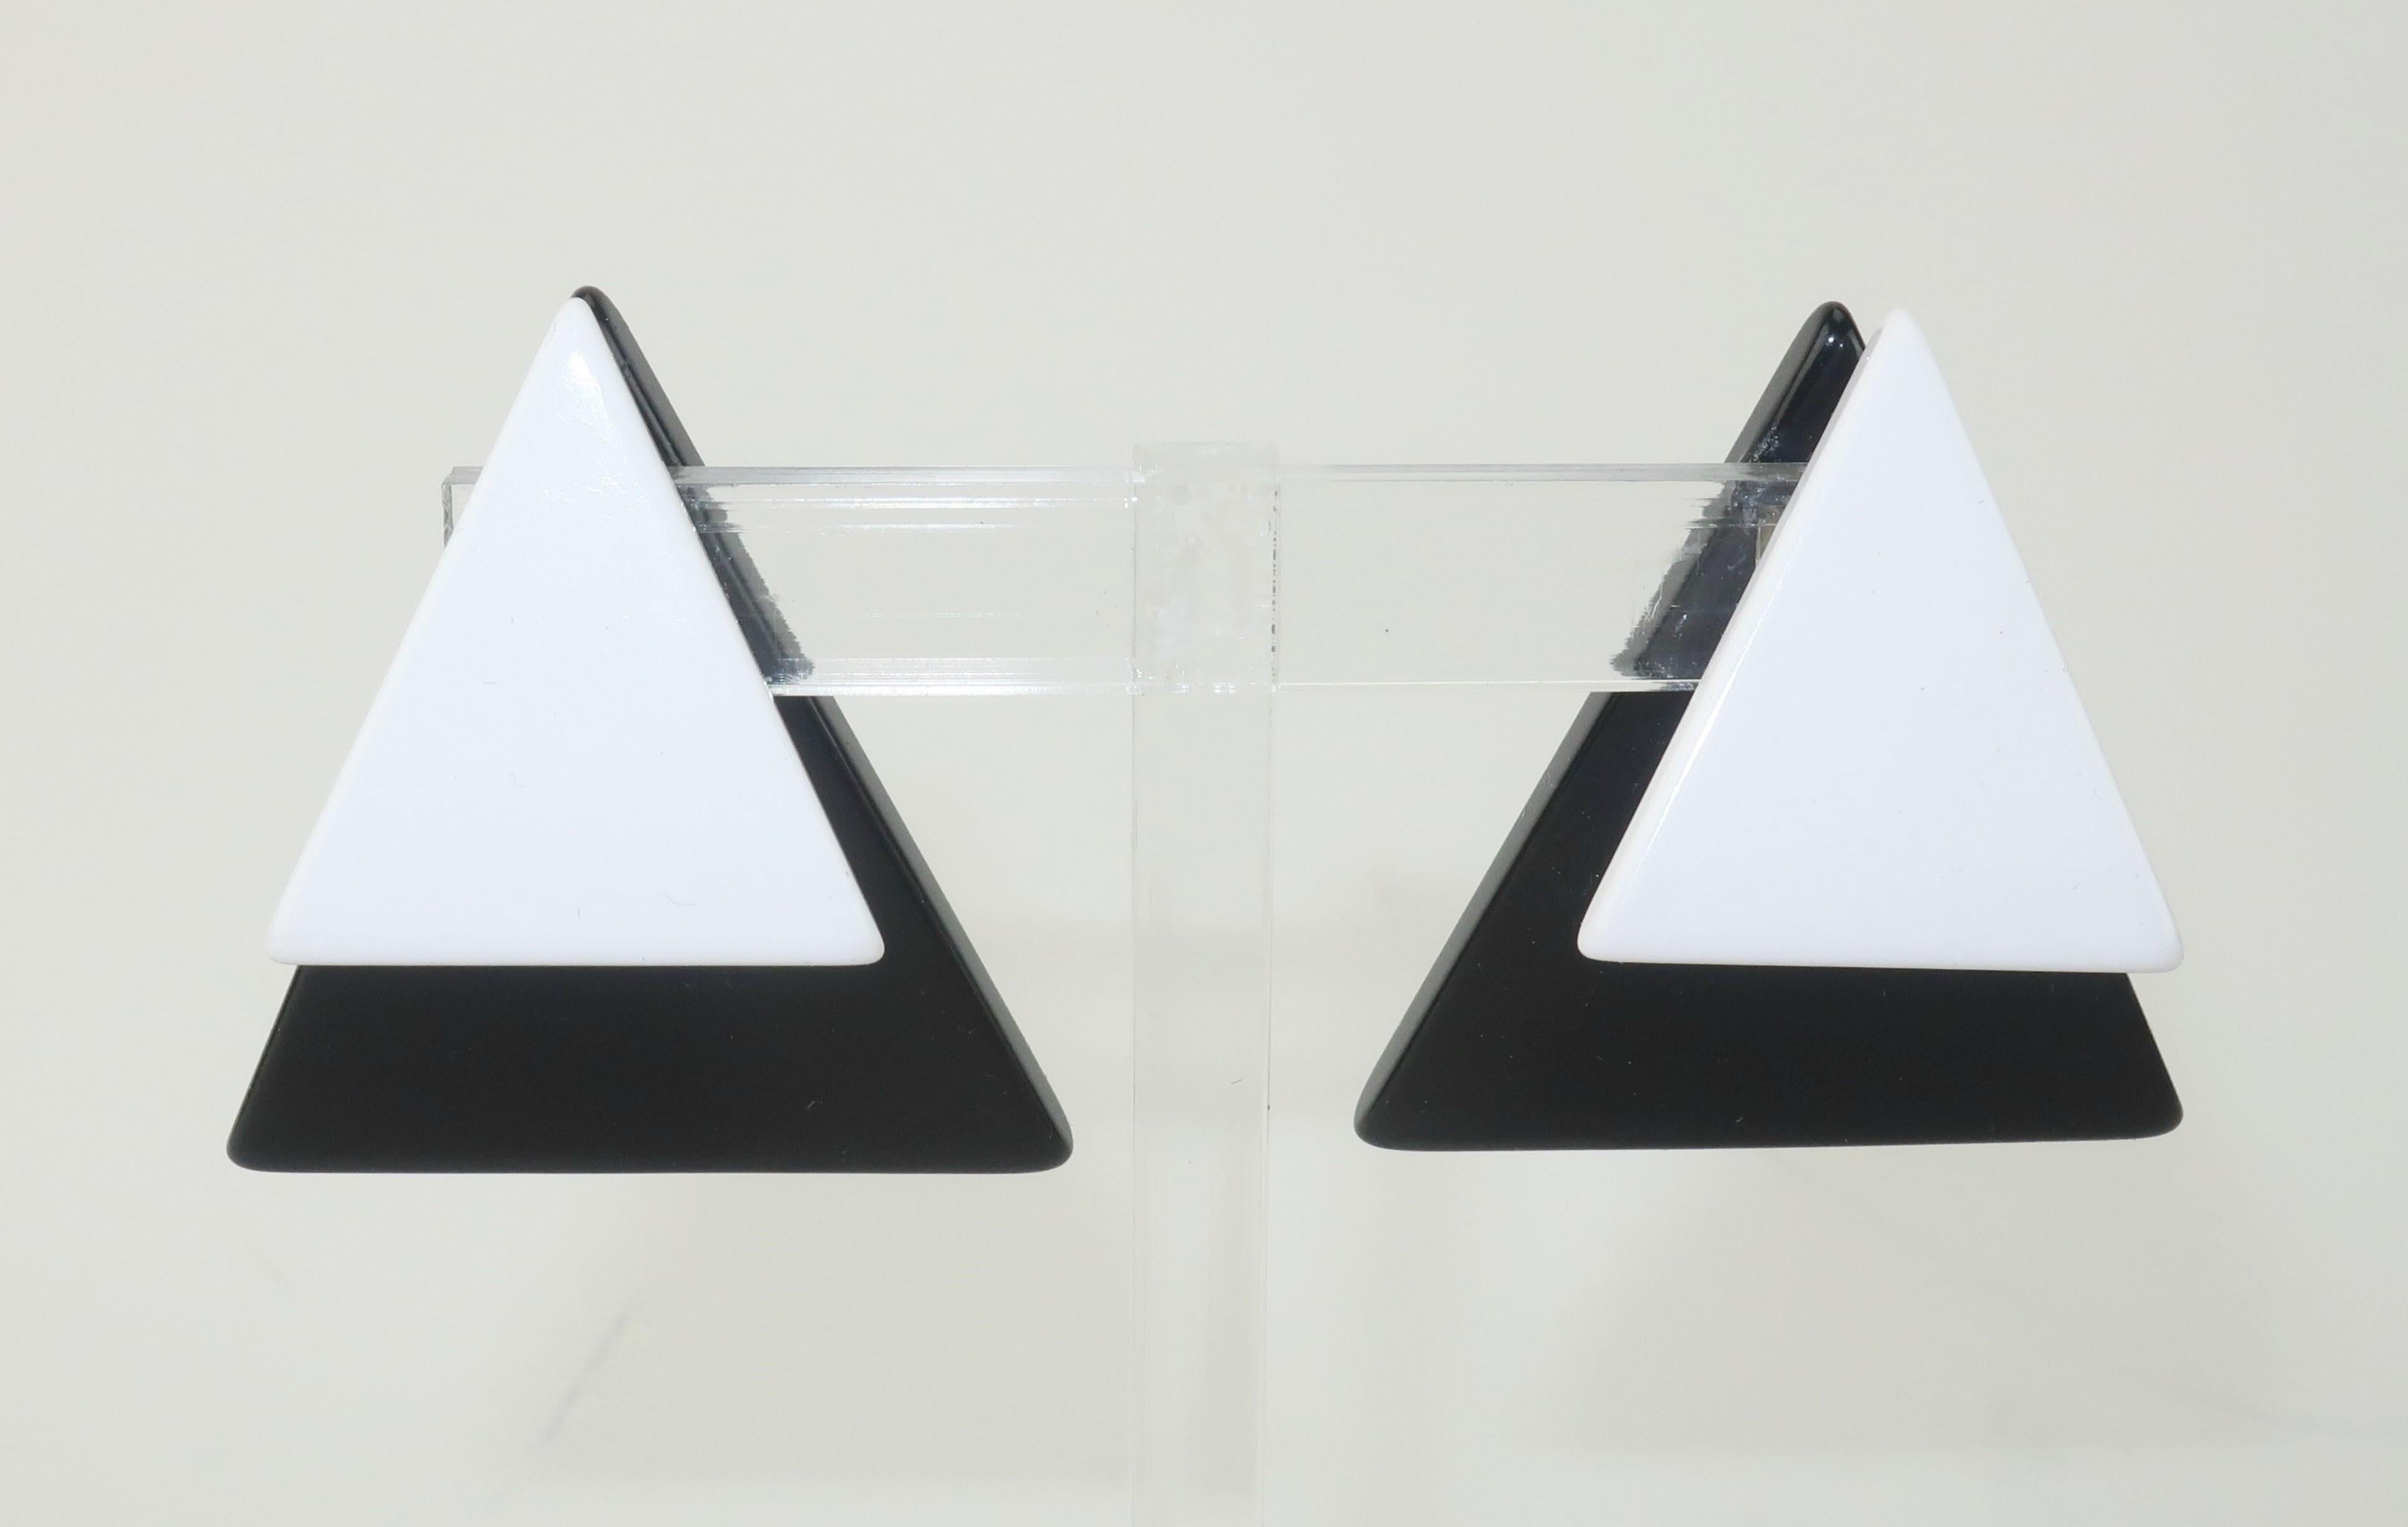 Italian jewelry designer Ugo Correani's black and white triangular resin earrings have a unique clip on spring that allows one triangle to suspend in front of the ear and the other in back.  Surprisingly, the clip on hardware is also very